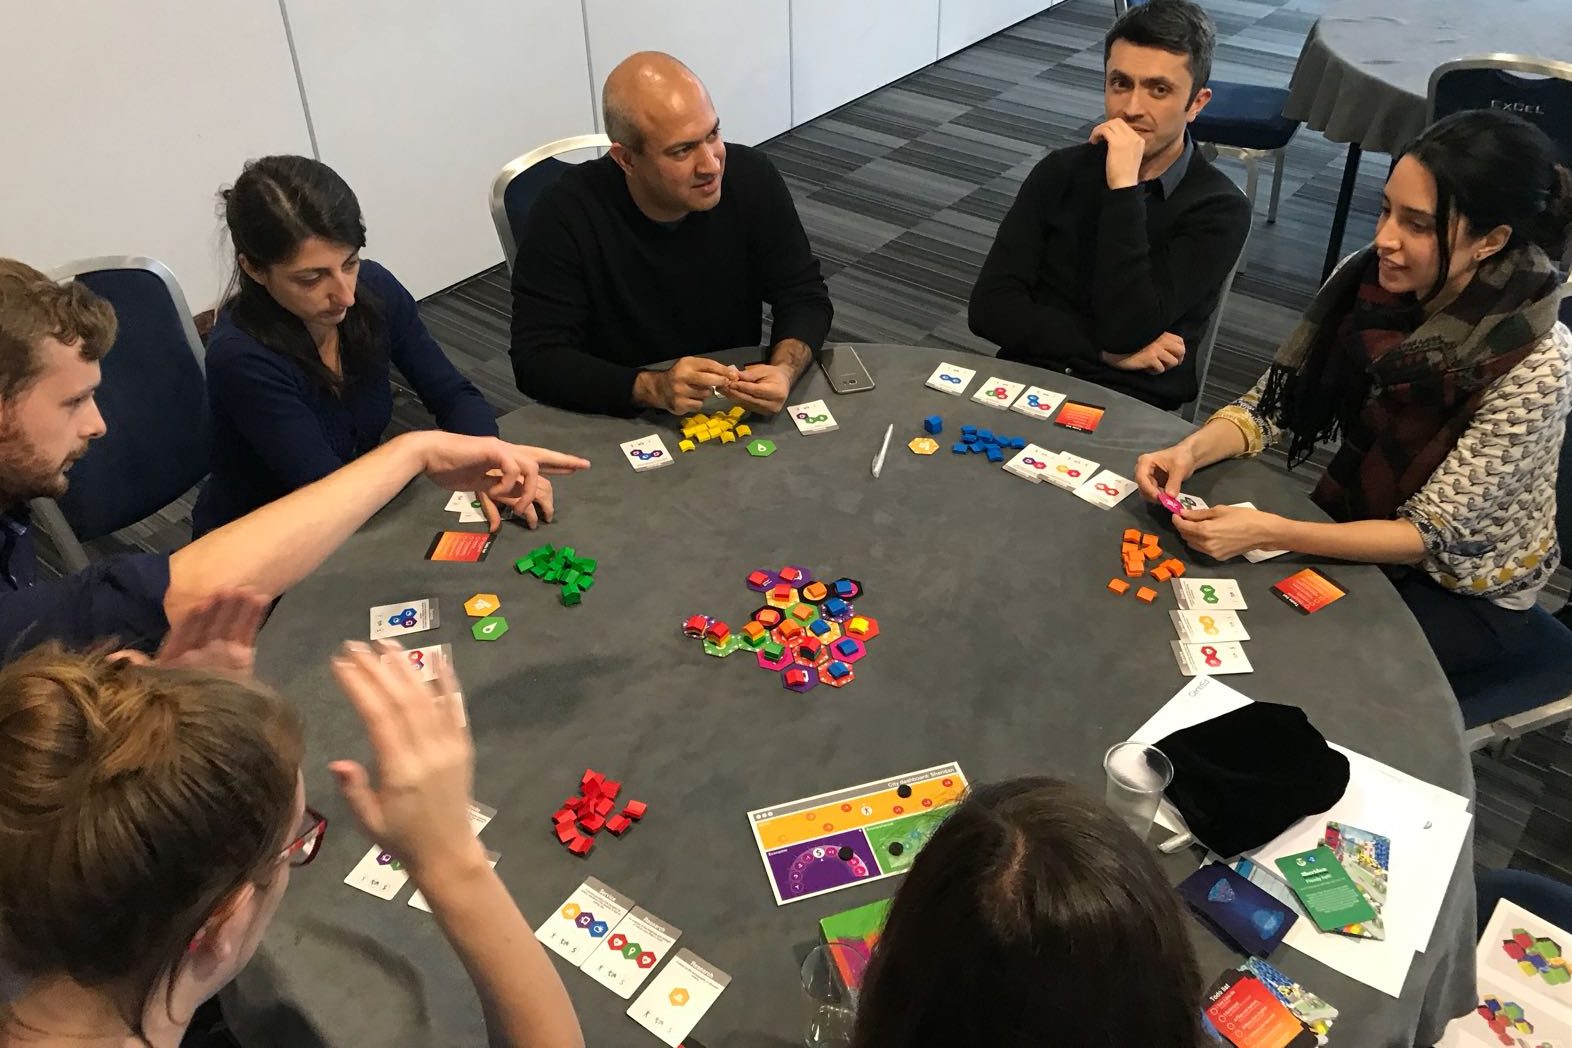 Play the data board game and learn about data strategy with data consultancy Mission Drive